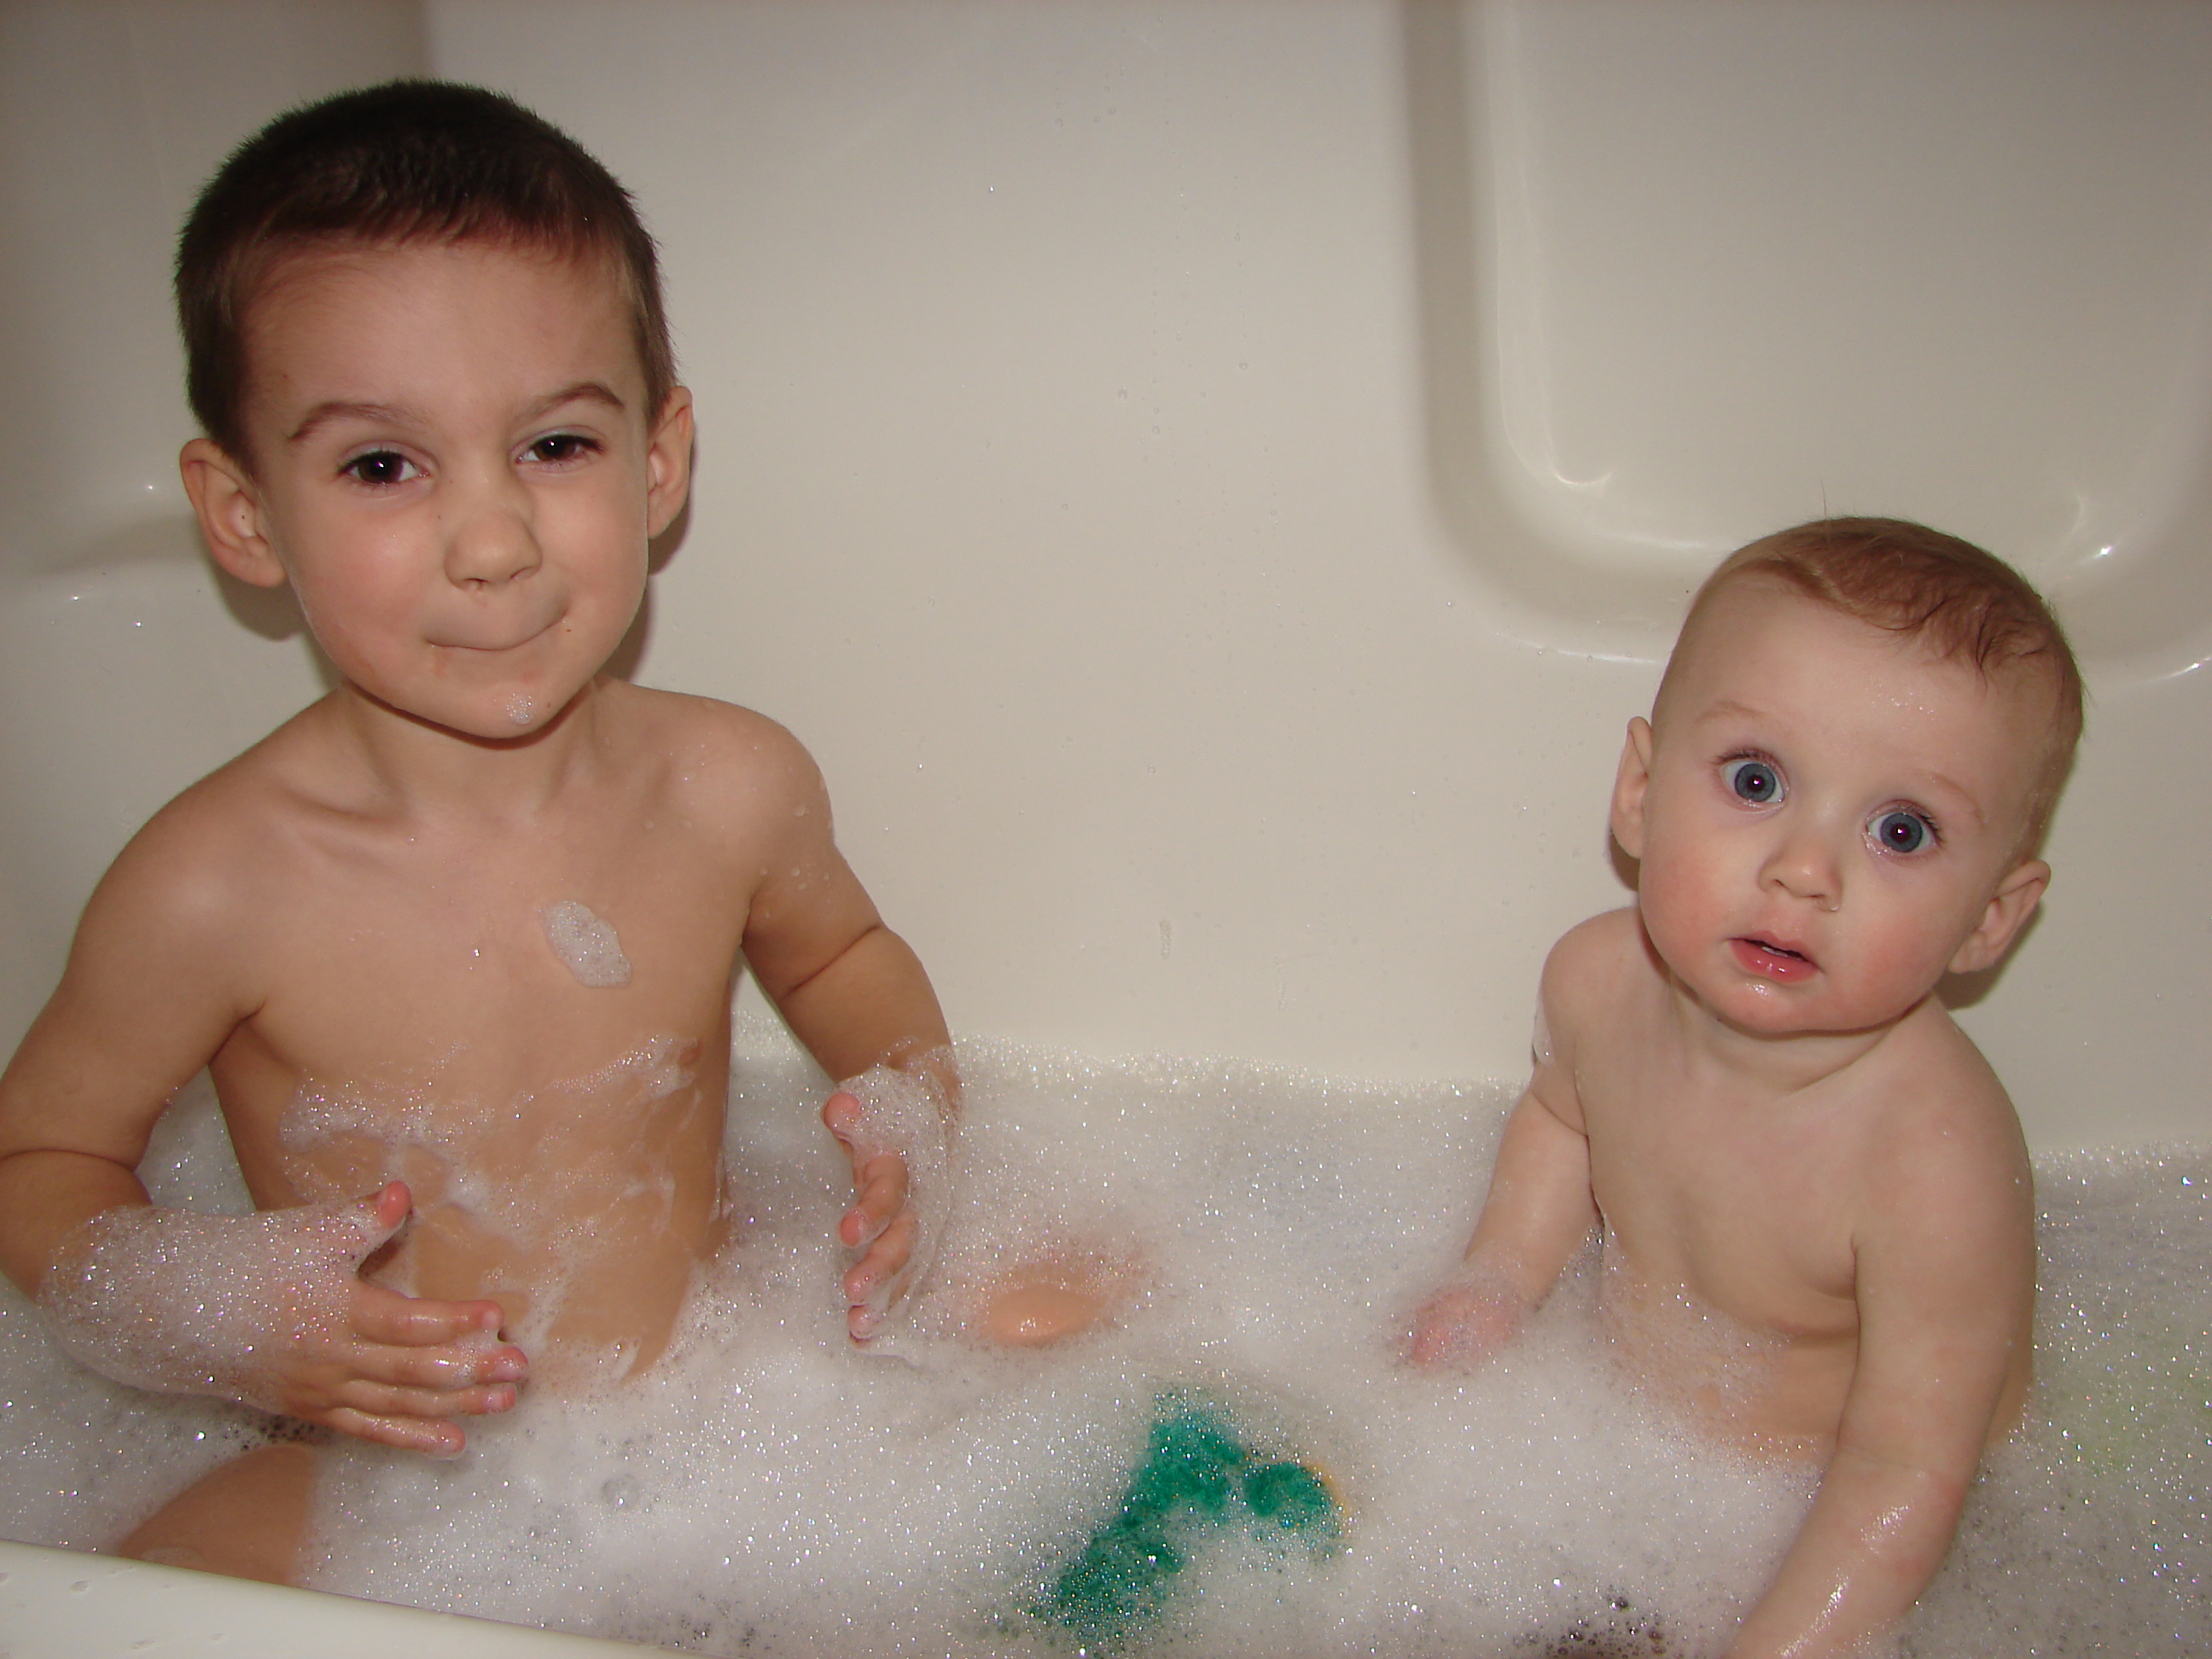 Pictures of nude women bathing little boys